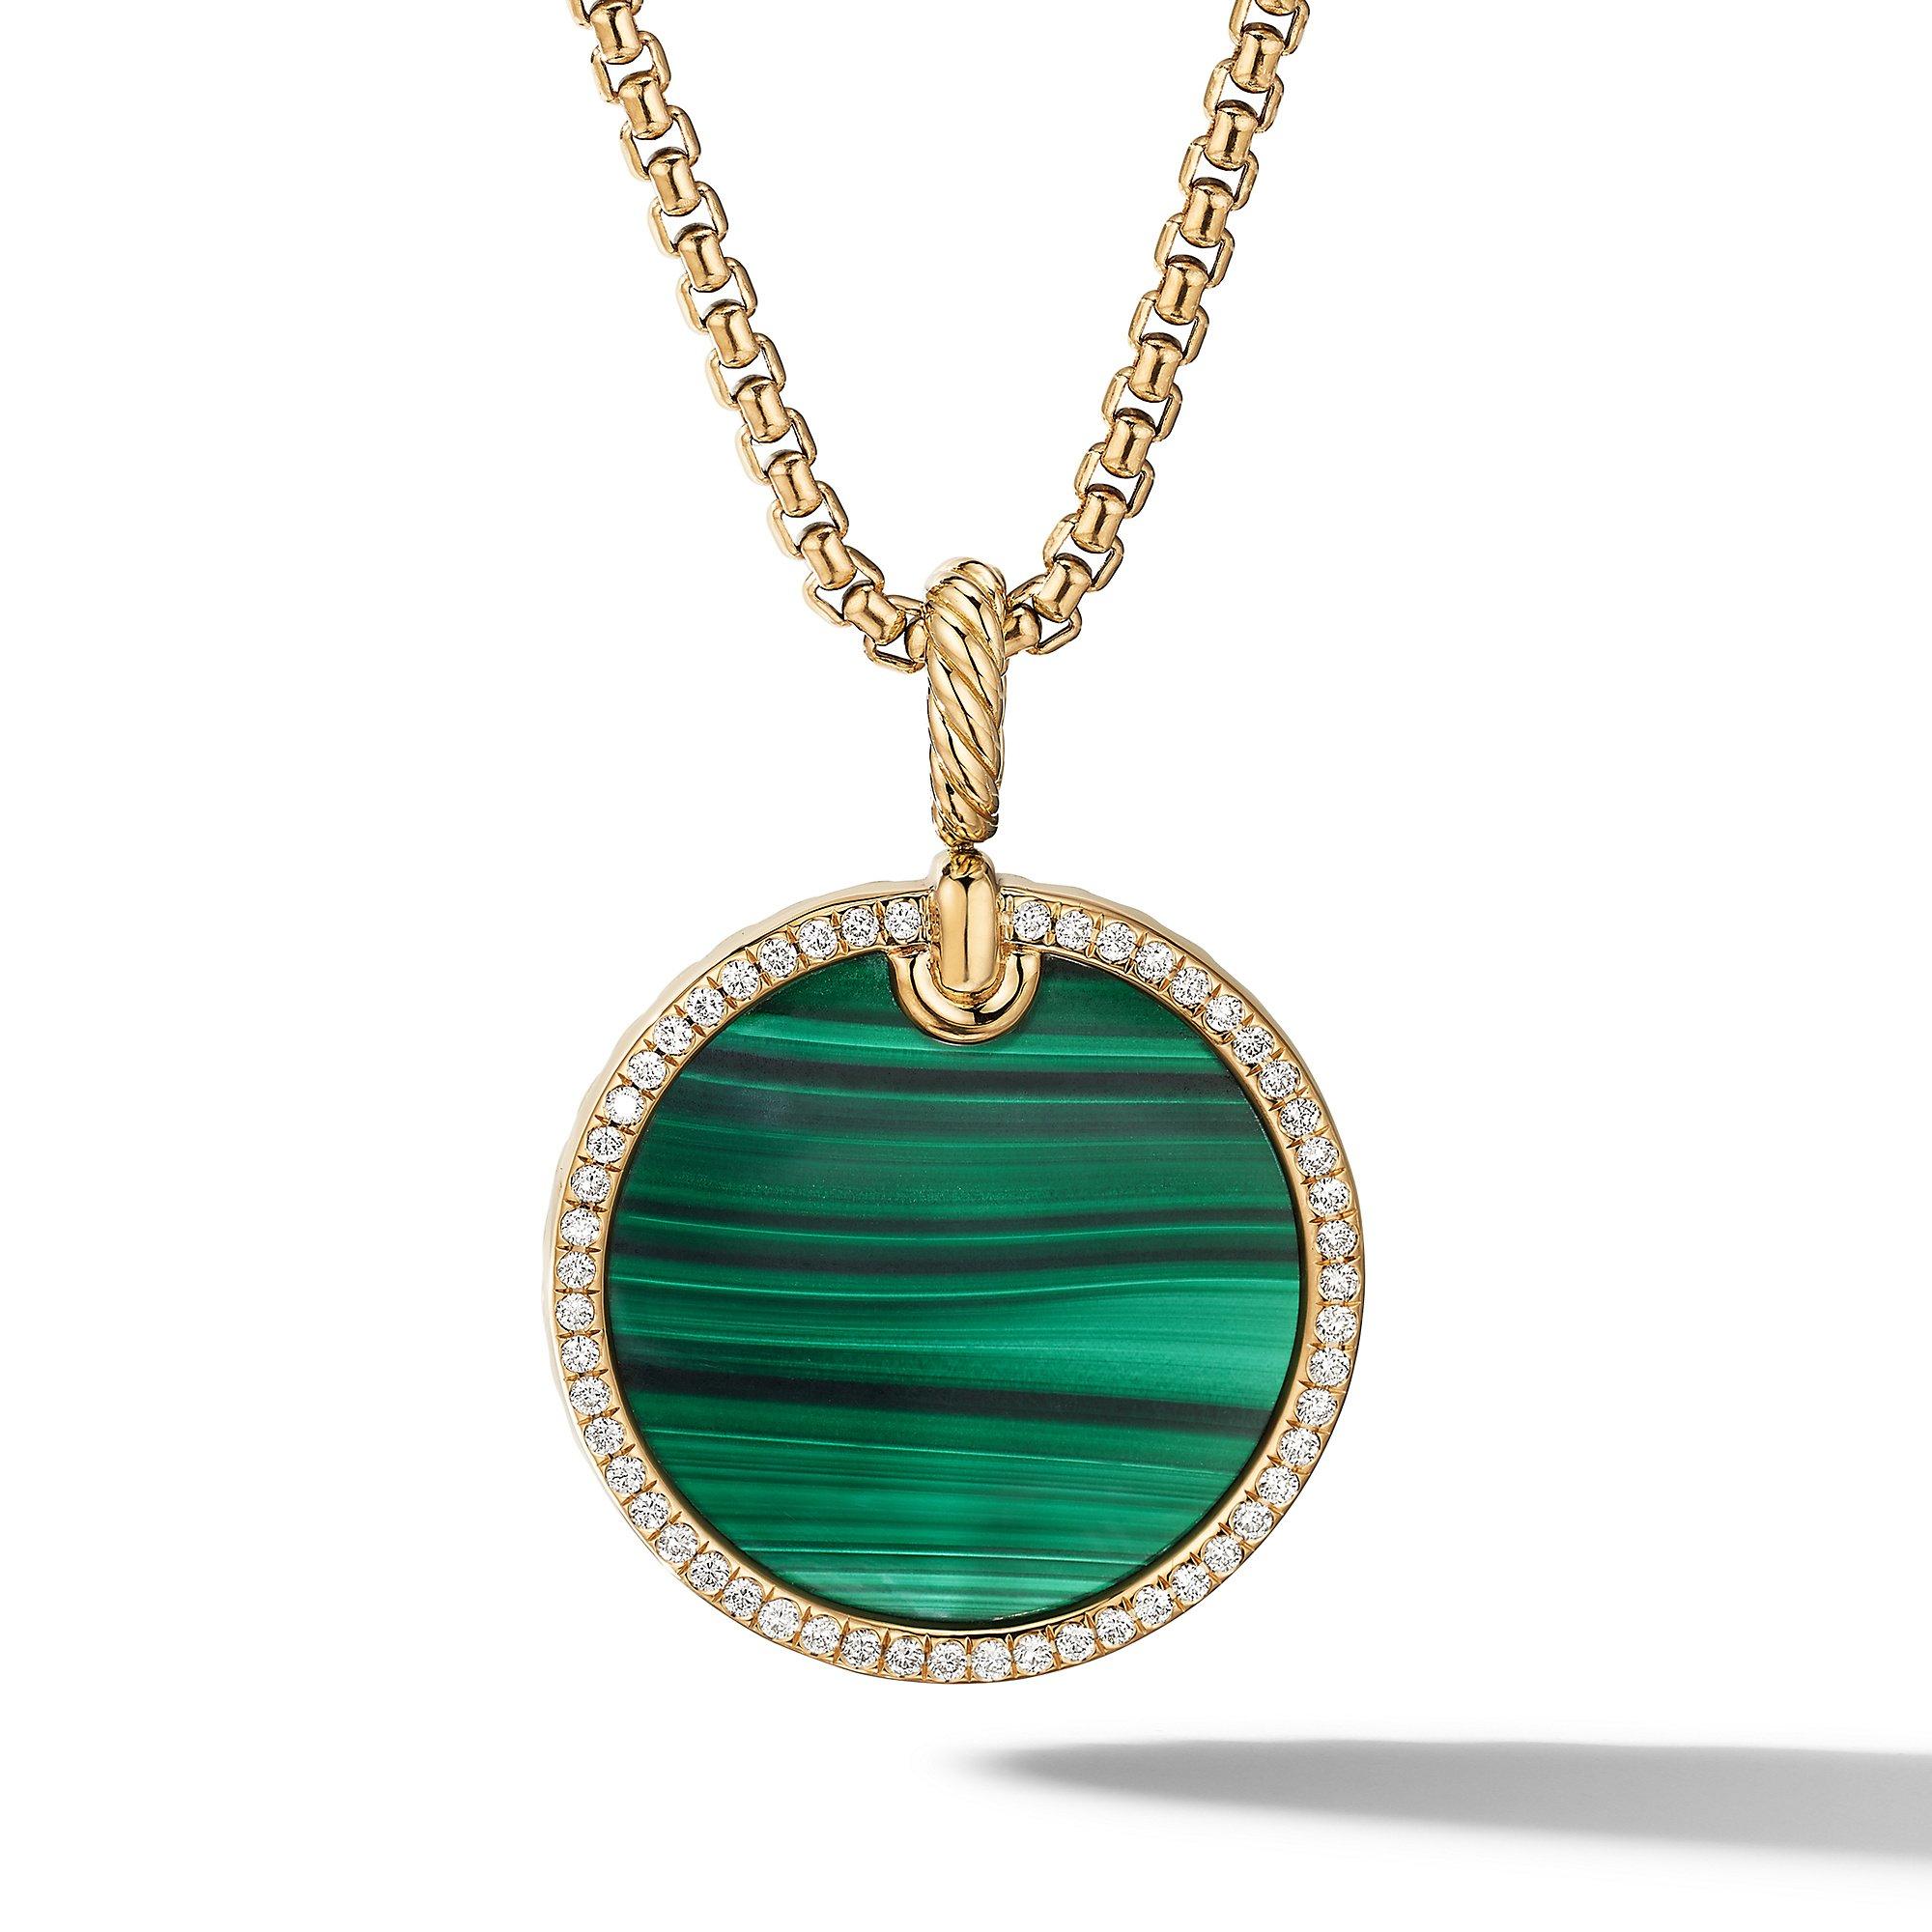 David Yurman Elements Disc Pendant in 18K Yellow Gold with Malachite and Pave Diamond Rim | Front View